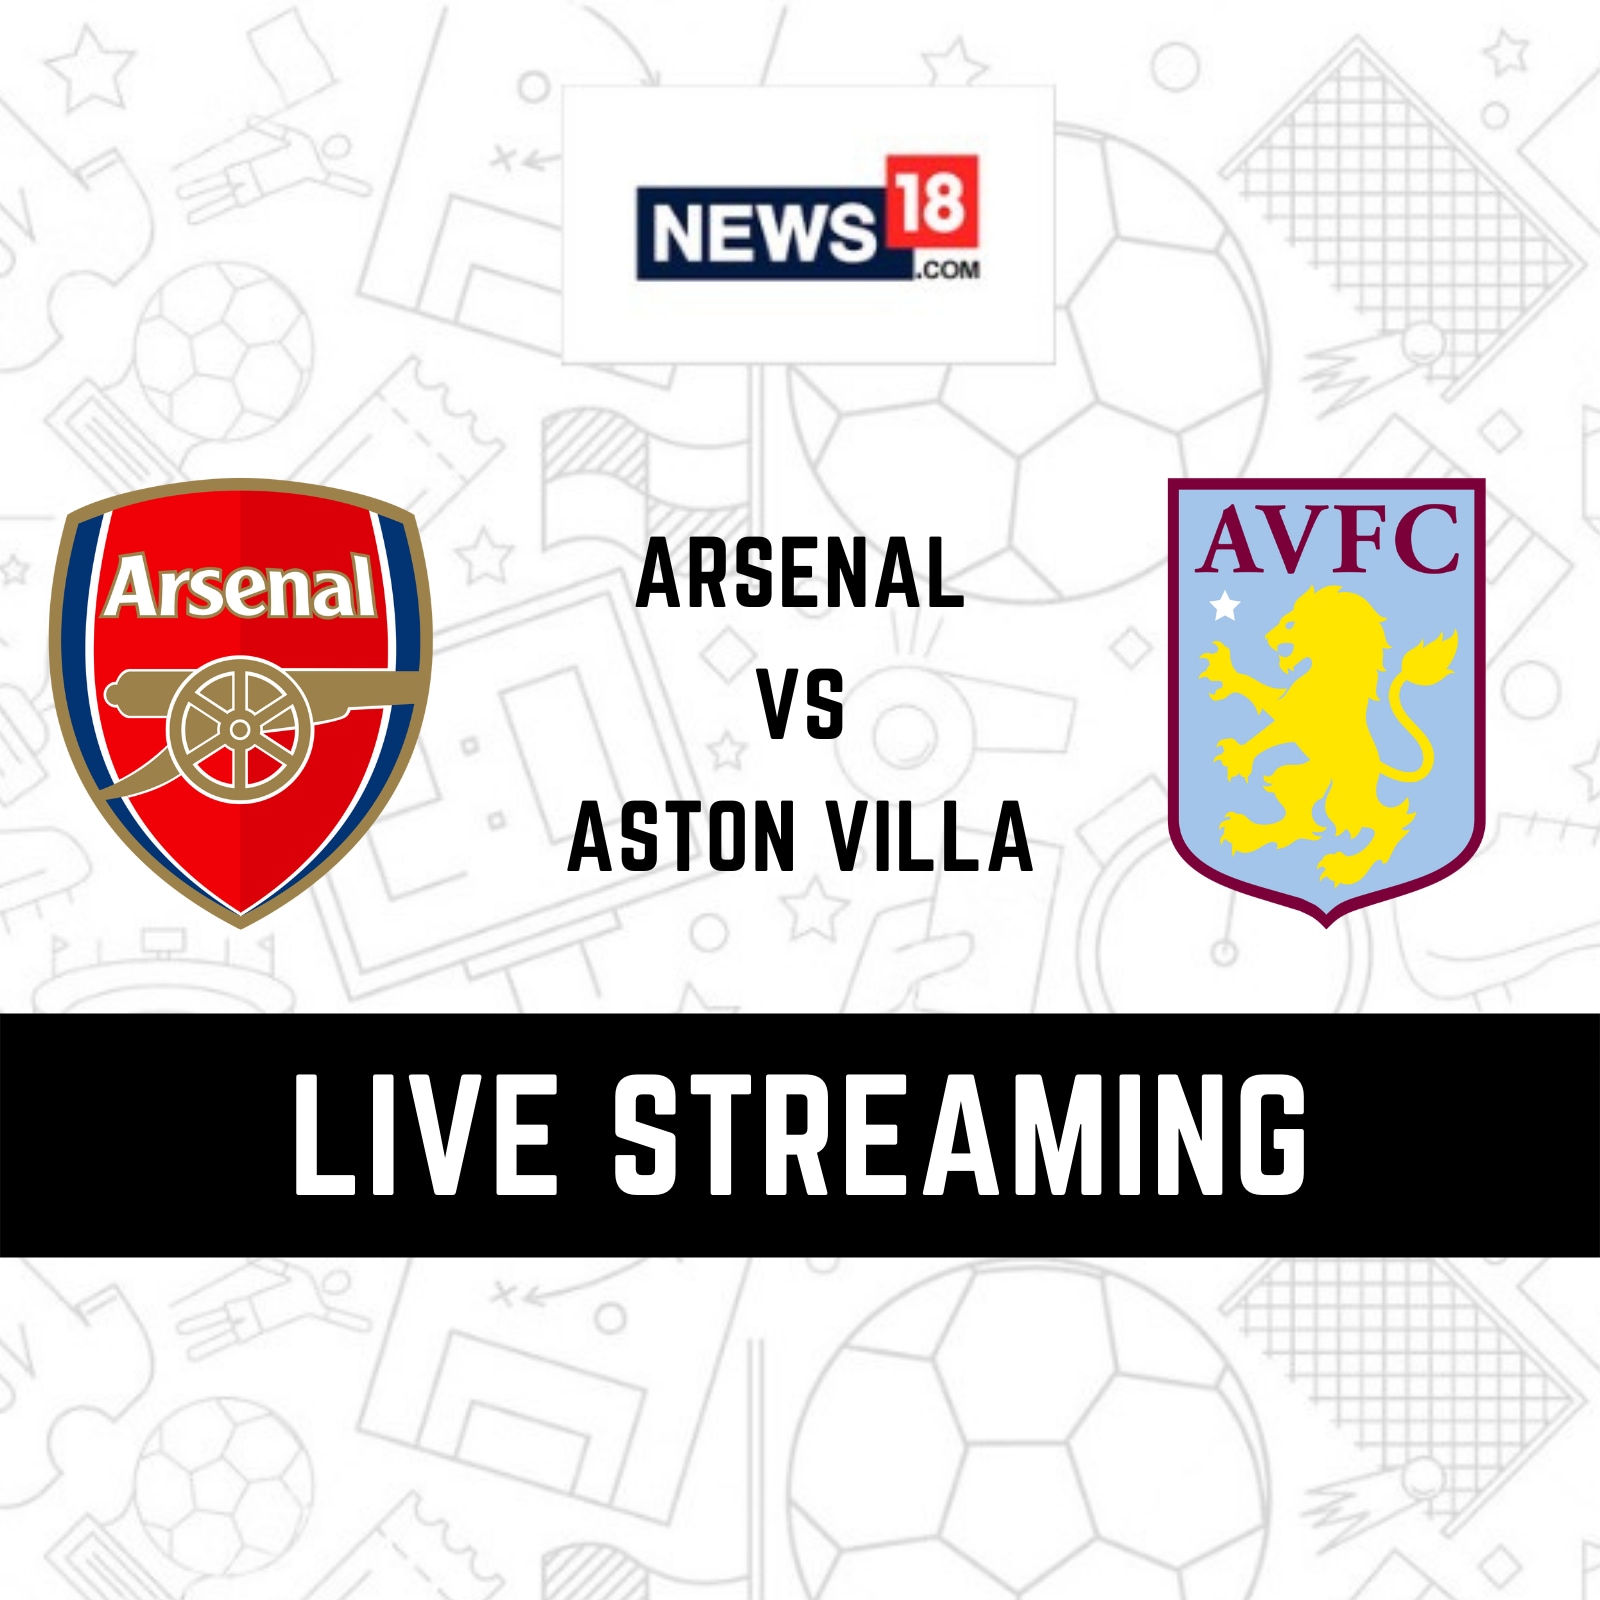 Arsenal vs Aston Villa Live Streaming When and Where to Watch Premier League Live Coverage on Live TV Online